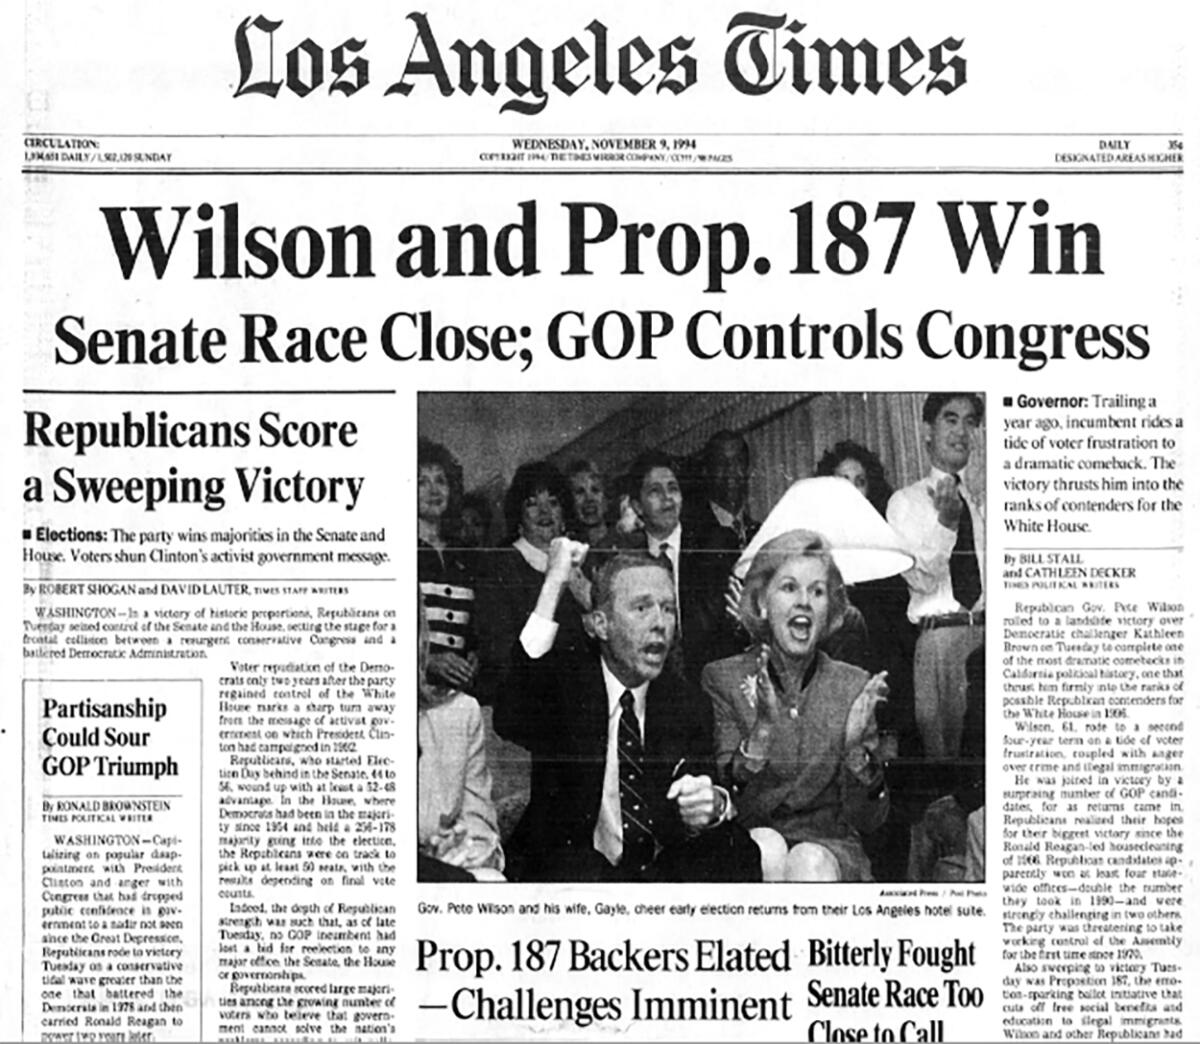 Nov. 9, 1994 front page of Los Angeles Times